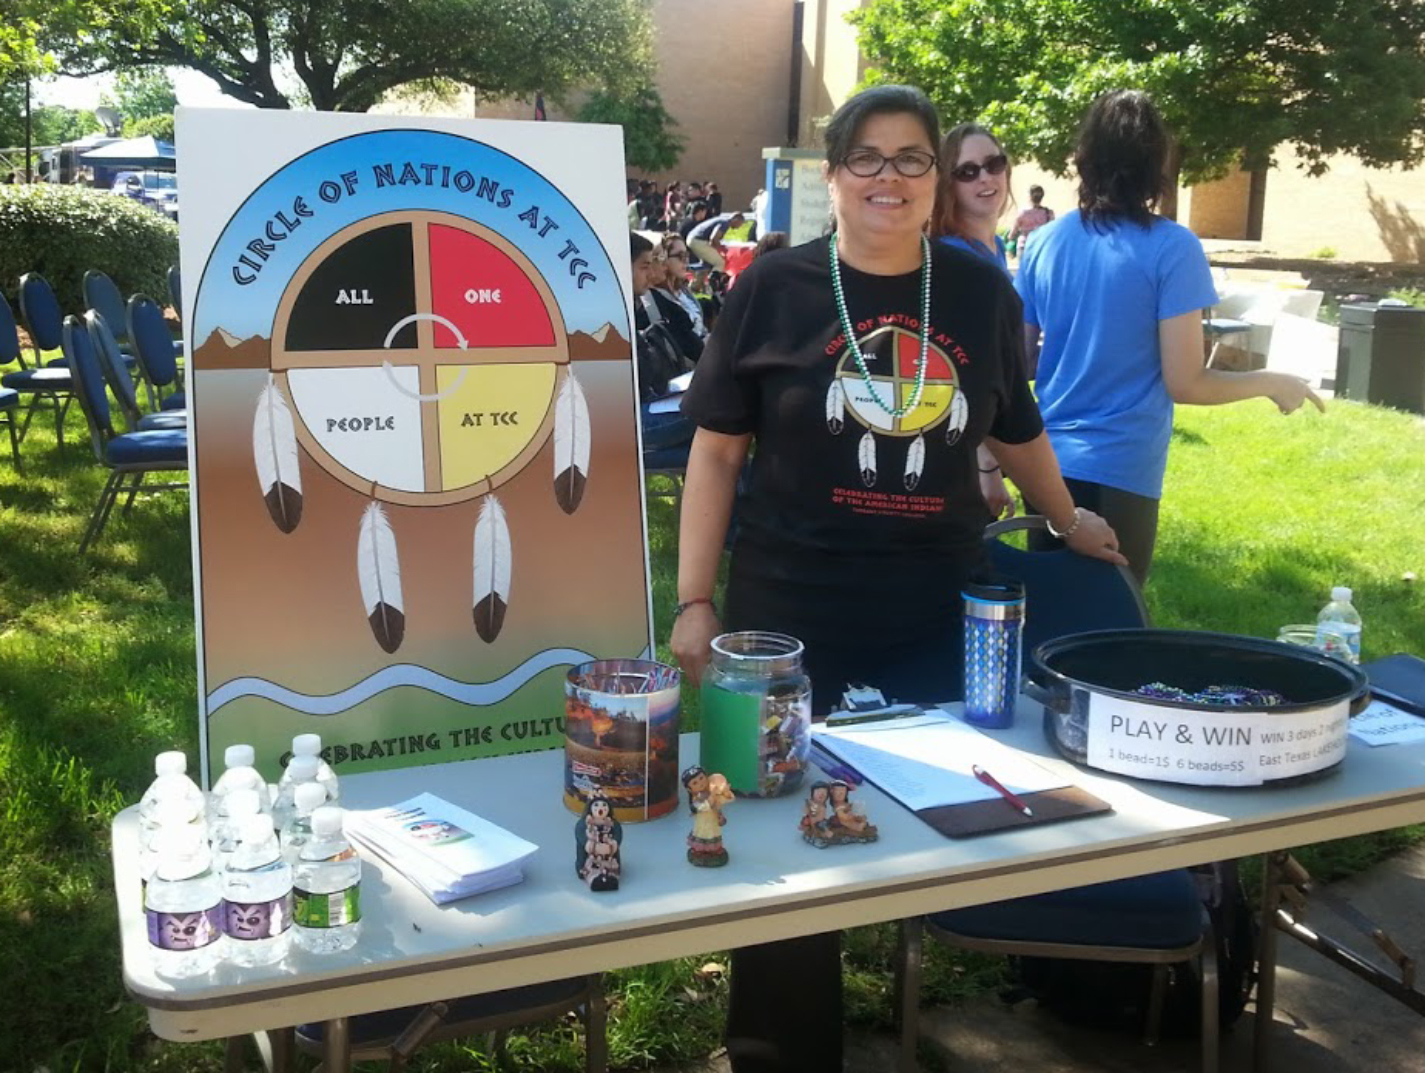 NE intercultural student engagement coordinator Marjeanna Burge shares her Native American Heritage at a NE Campus event.